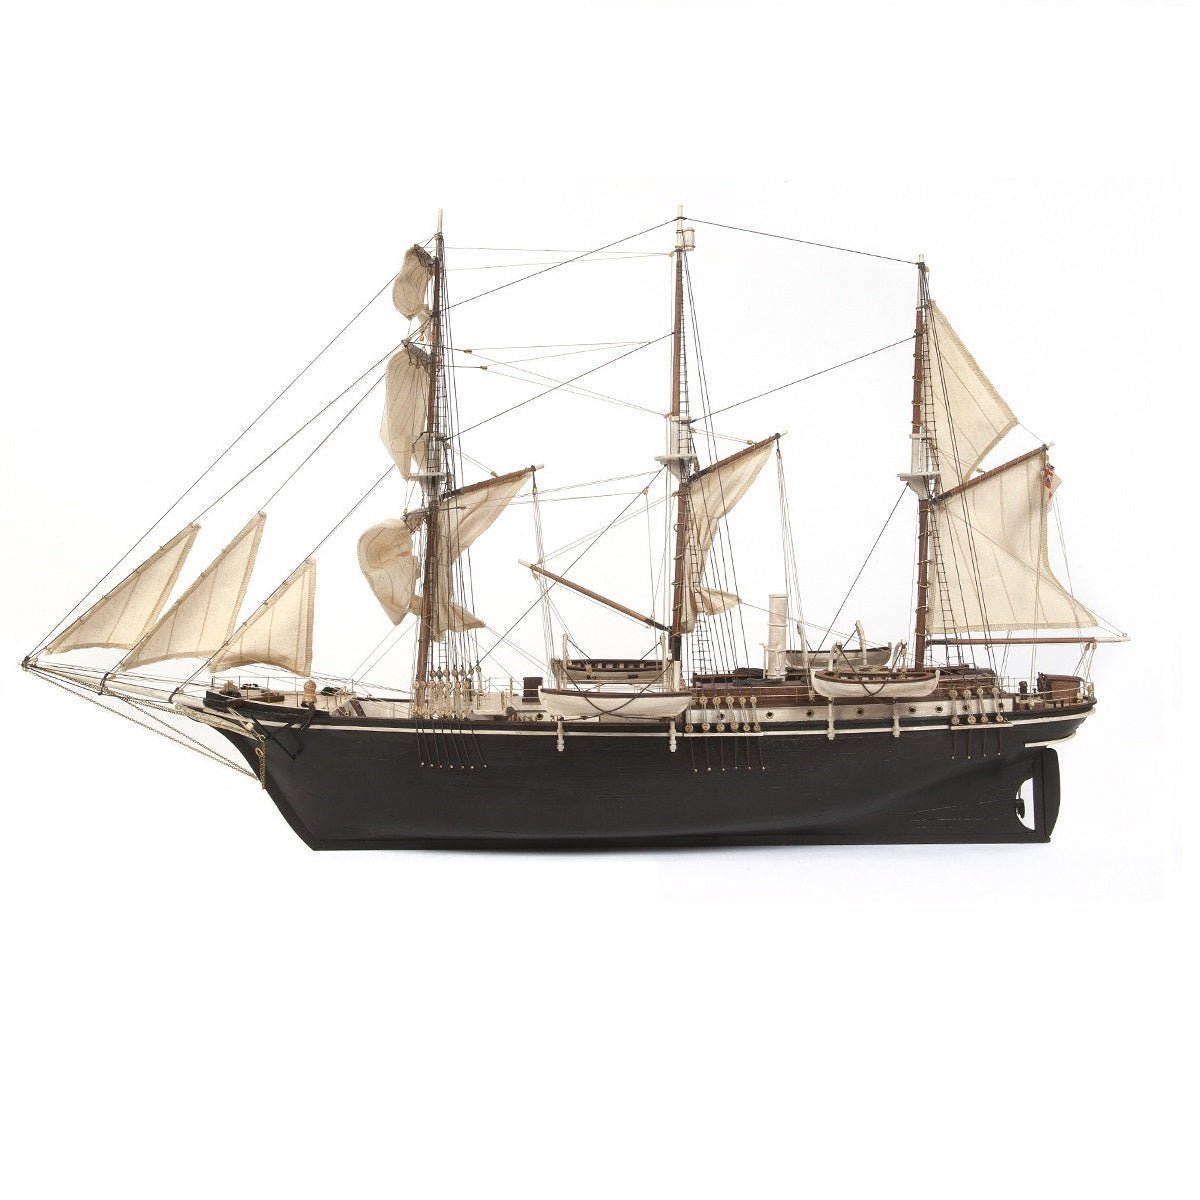 OcCre® Endurance Wooden Ship Kit, 1/70 Scale - Micro - Mark Scale Model Kits